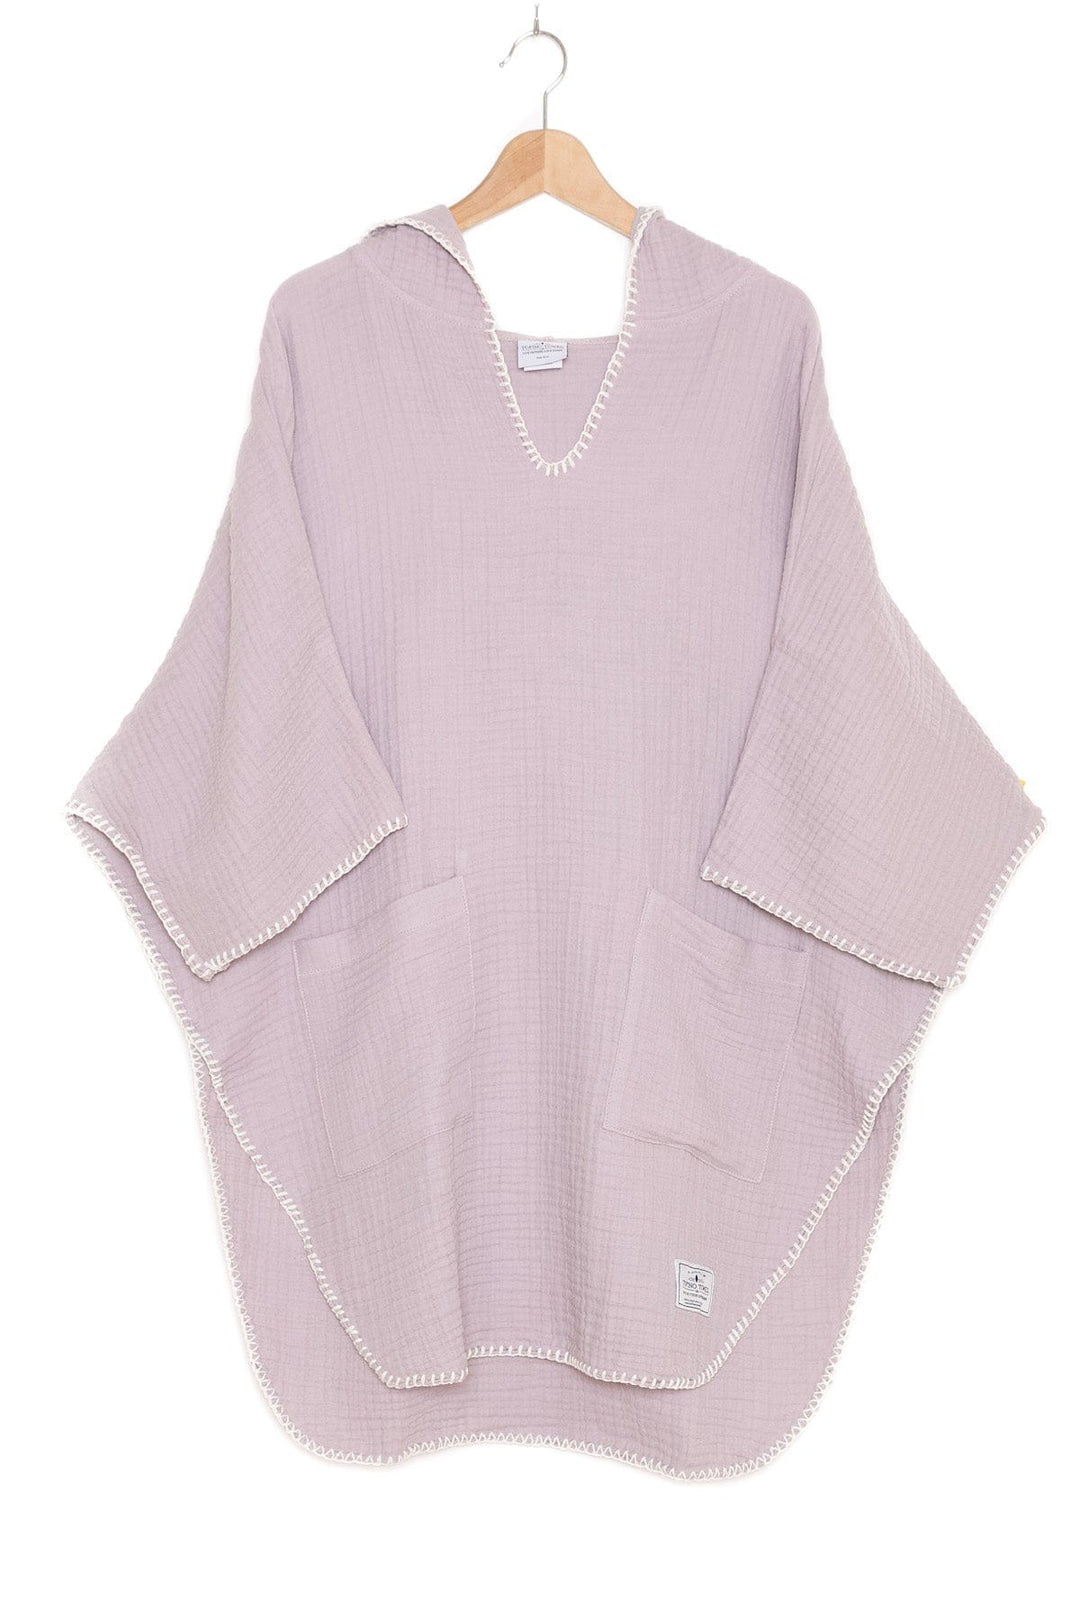 Tofino Towels Robes Lilac Tofino Towels | WOMEN'S COCOON SURF PONCHO